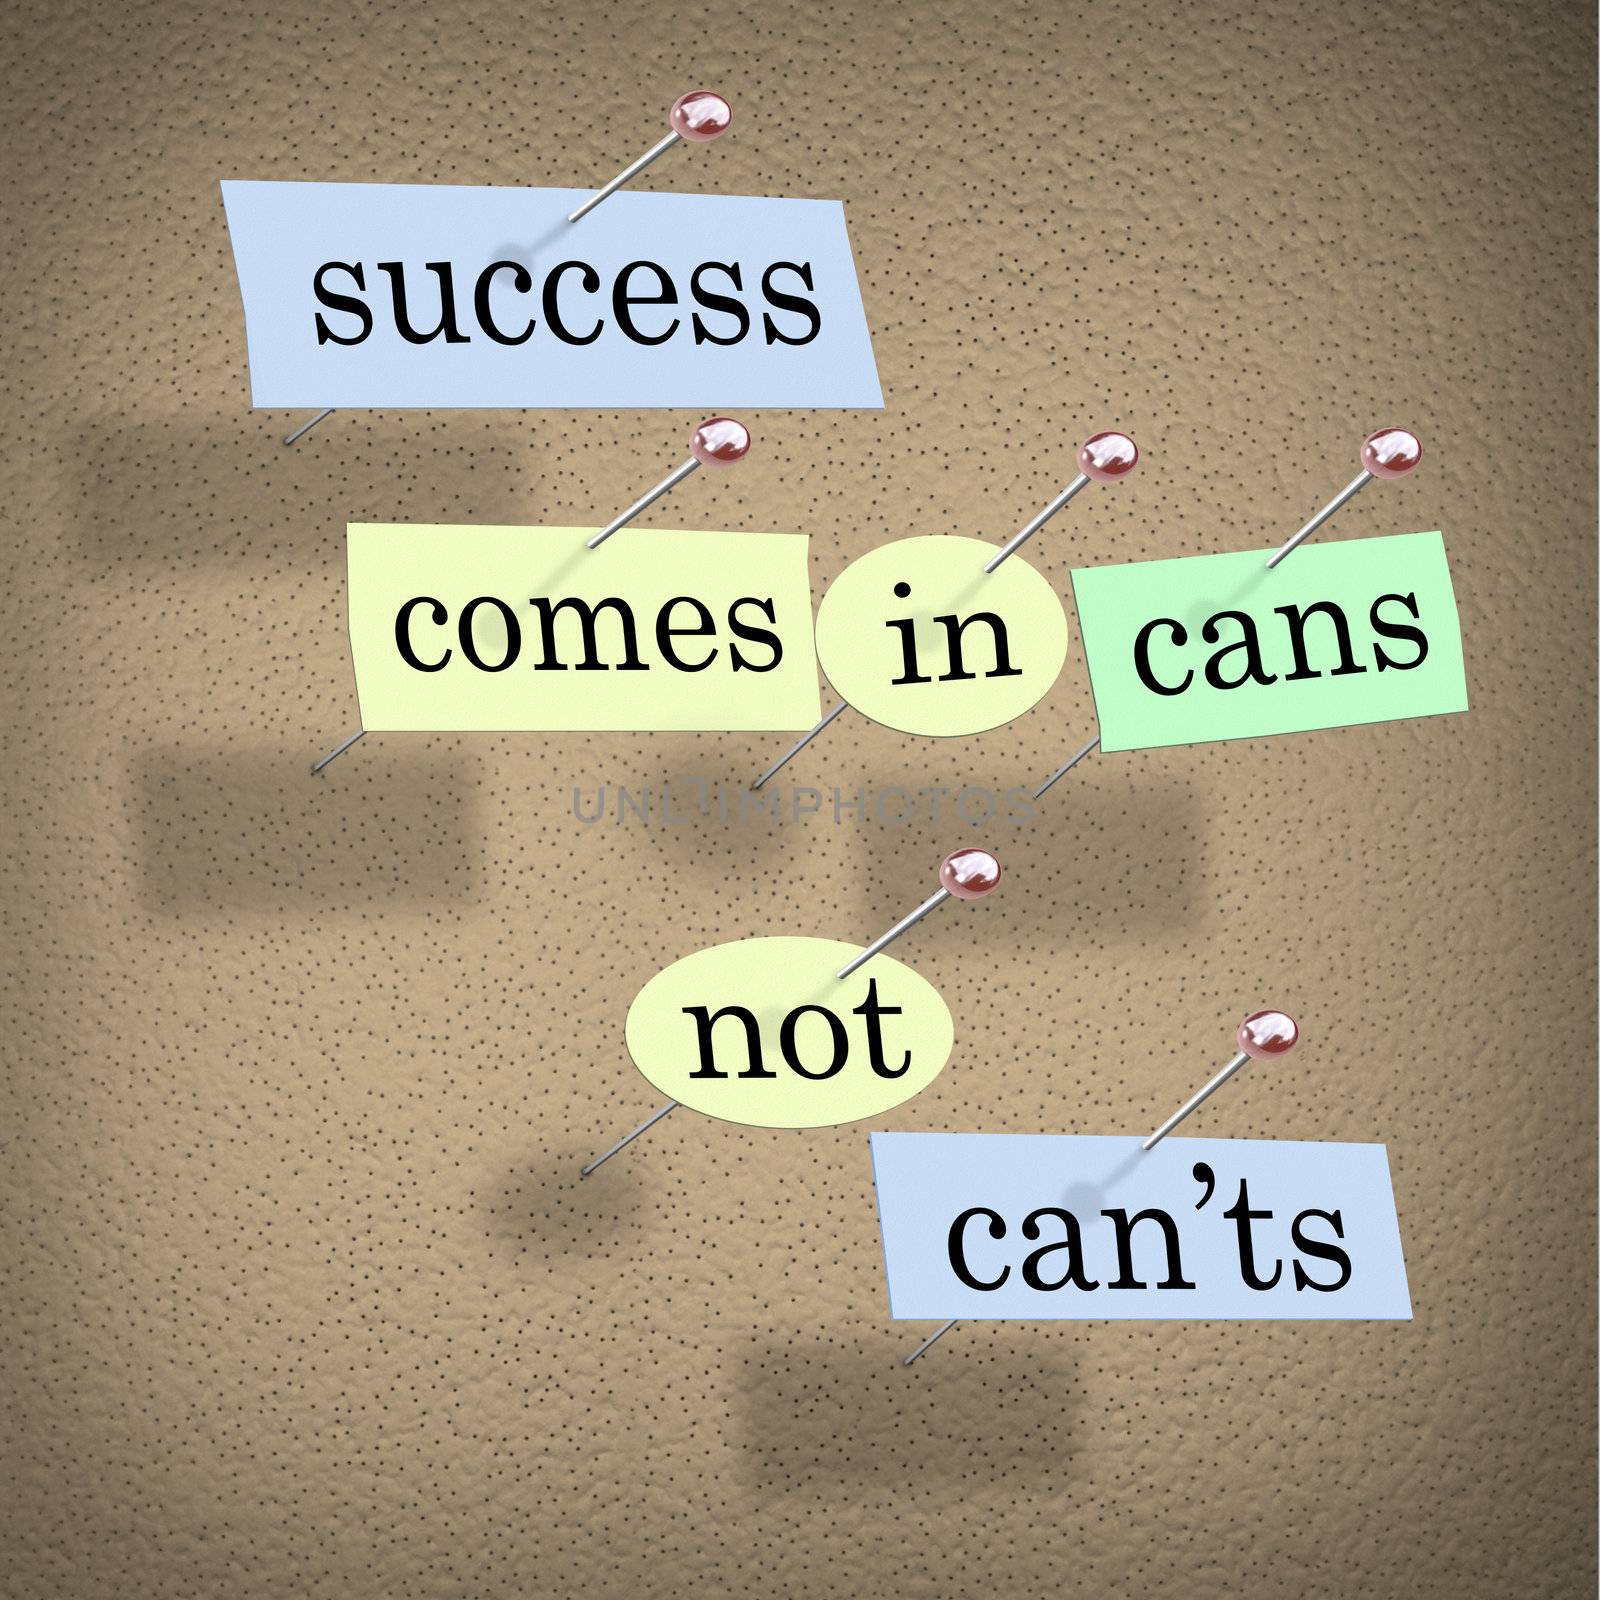 Success Comes in Cans Not Can'ts Saying on Paper Pieces Pinned to a Cork Board, a positive motivational message meant to inspire people to succeed